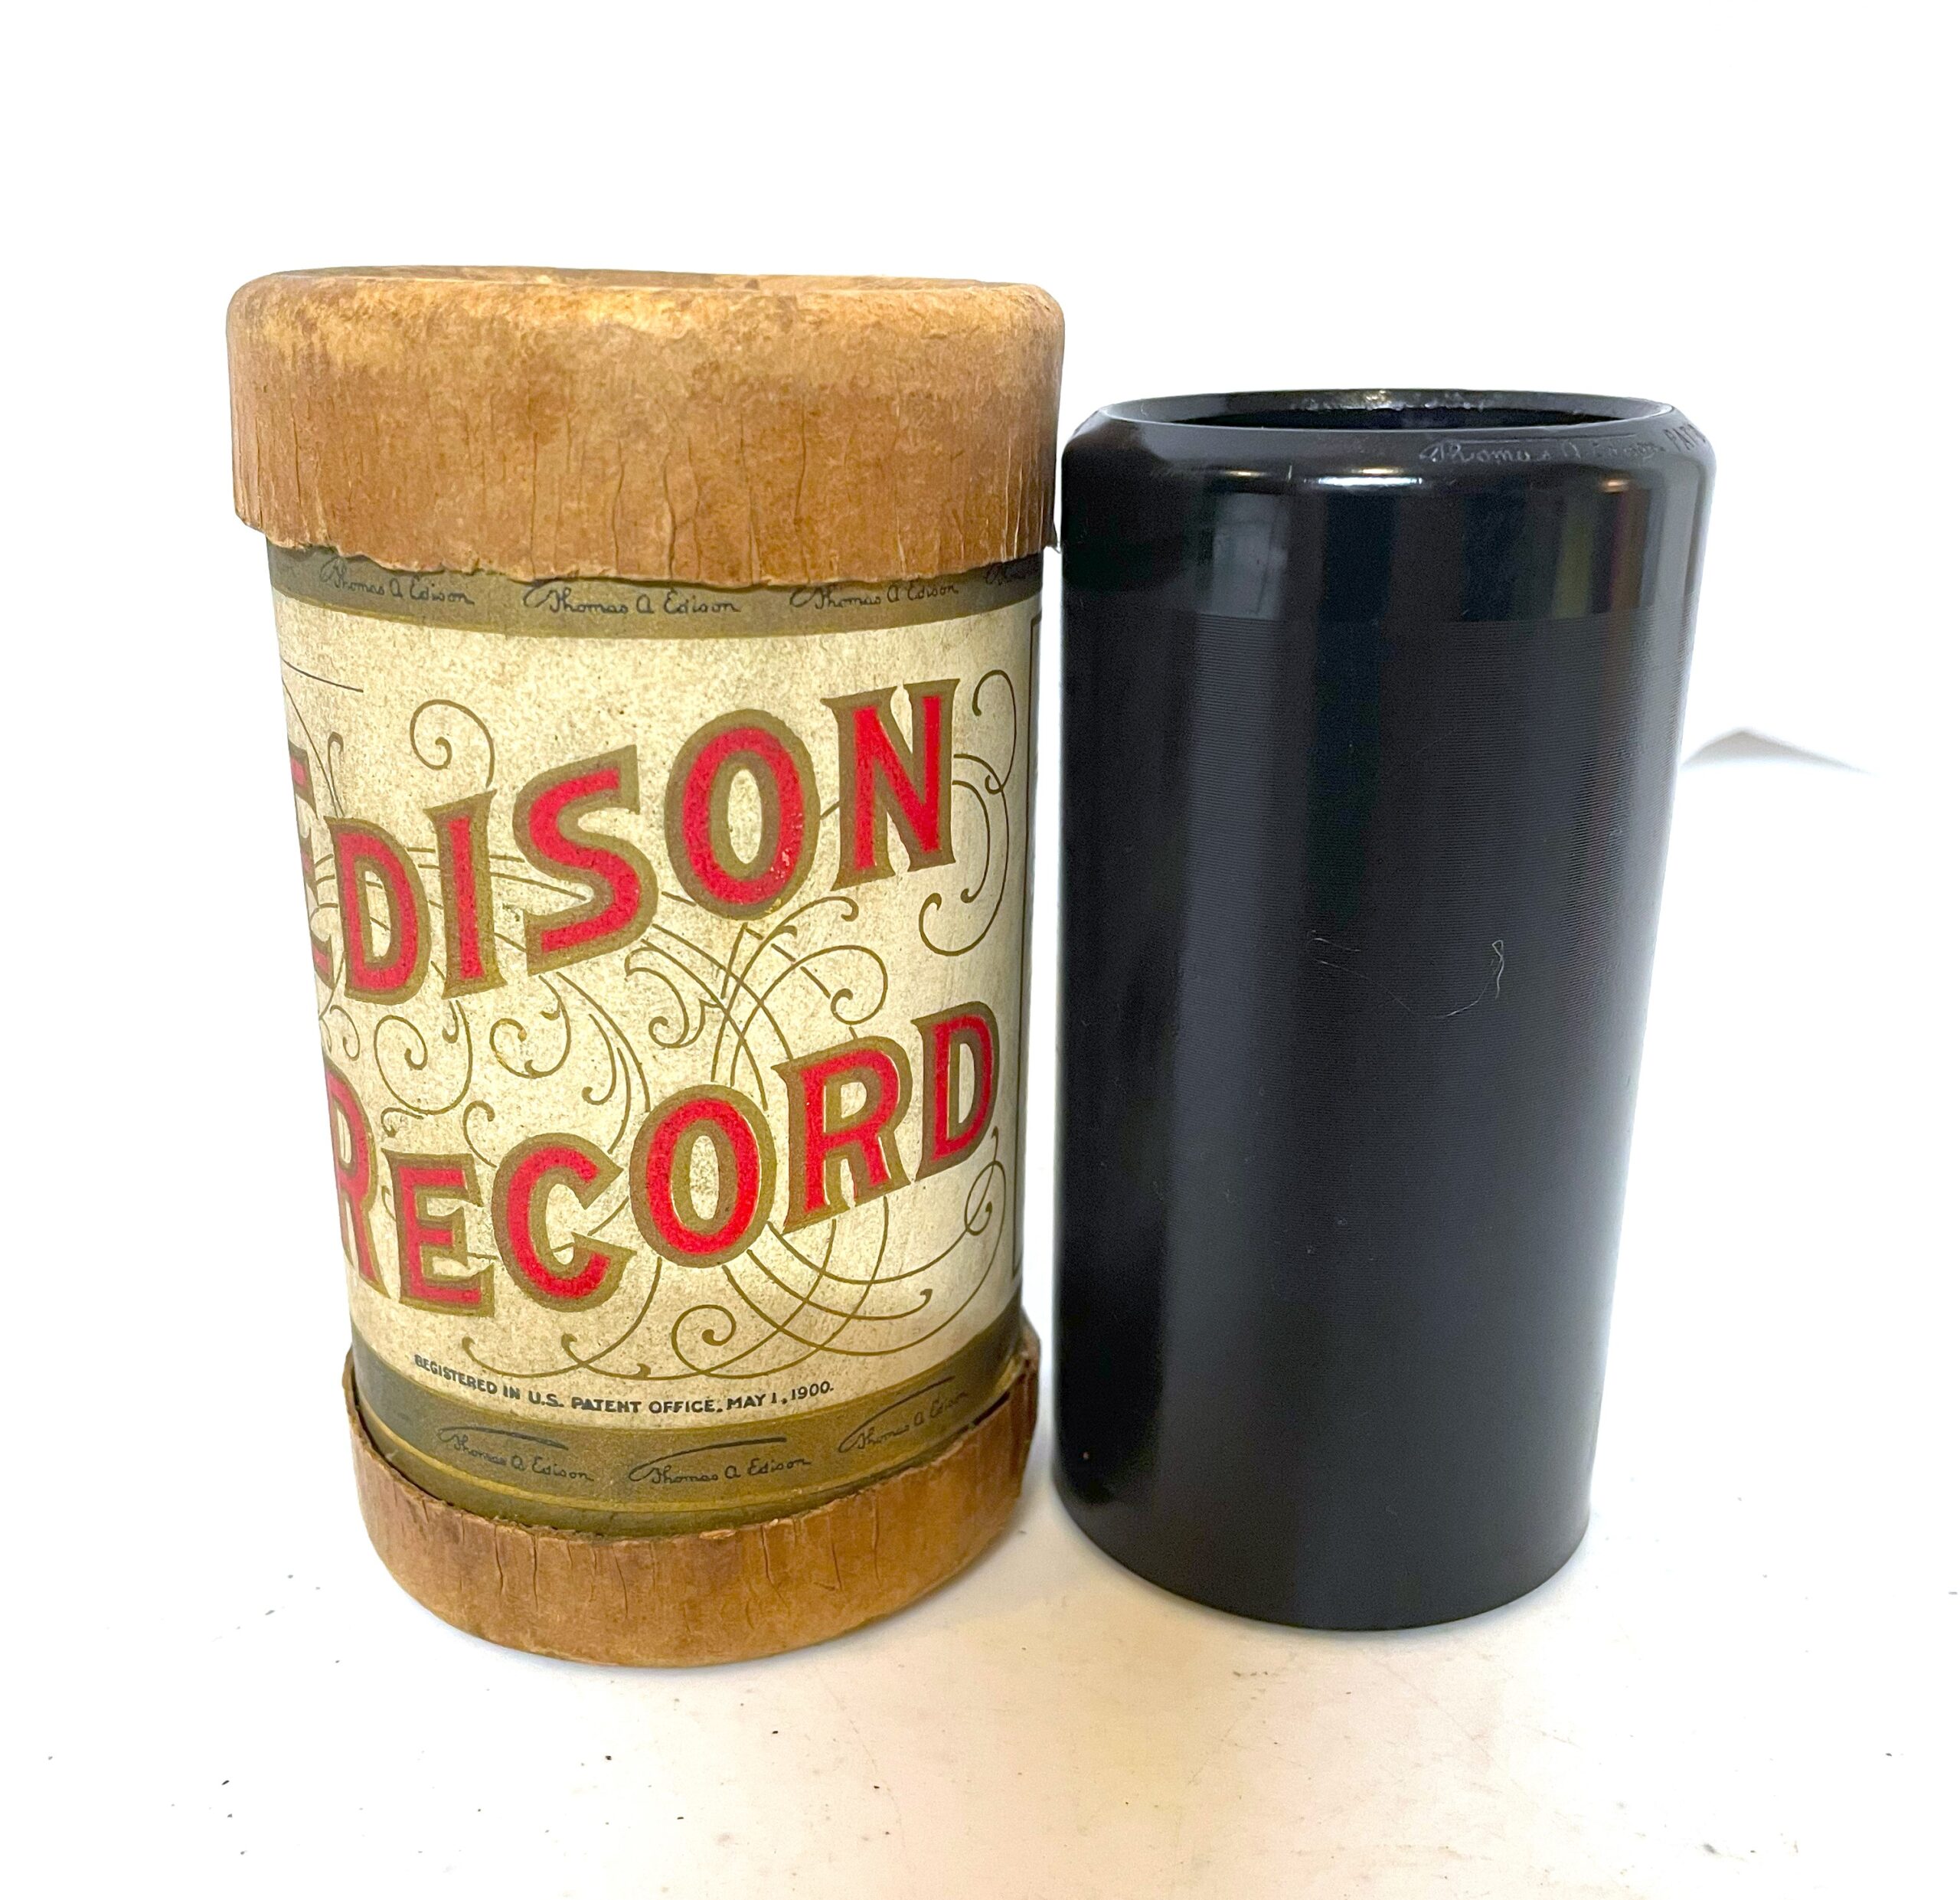 Edison 2-minute Cylinder…” Castles in the Air”